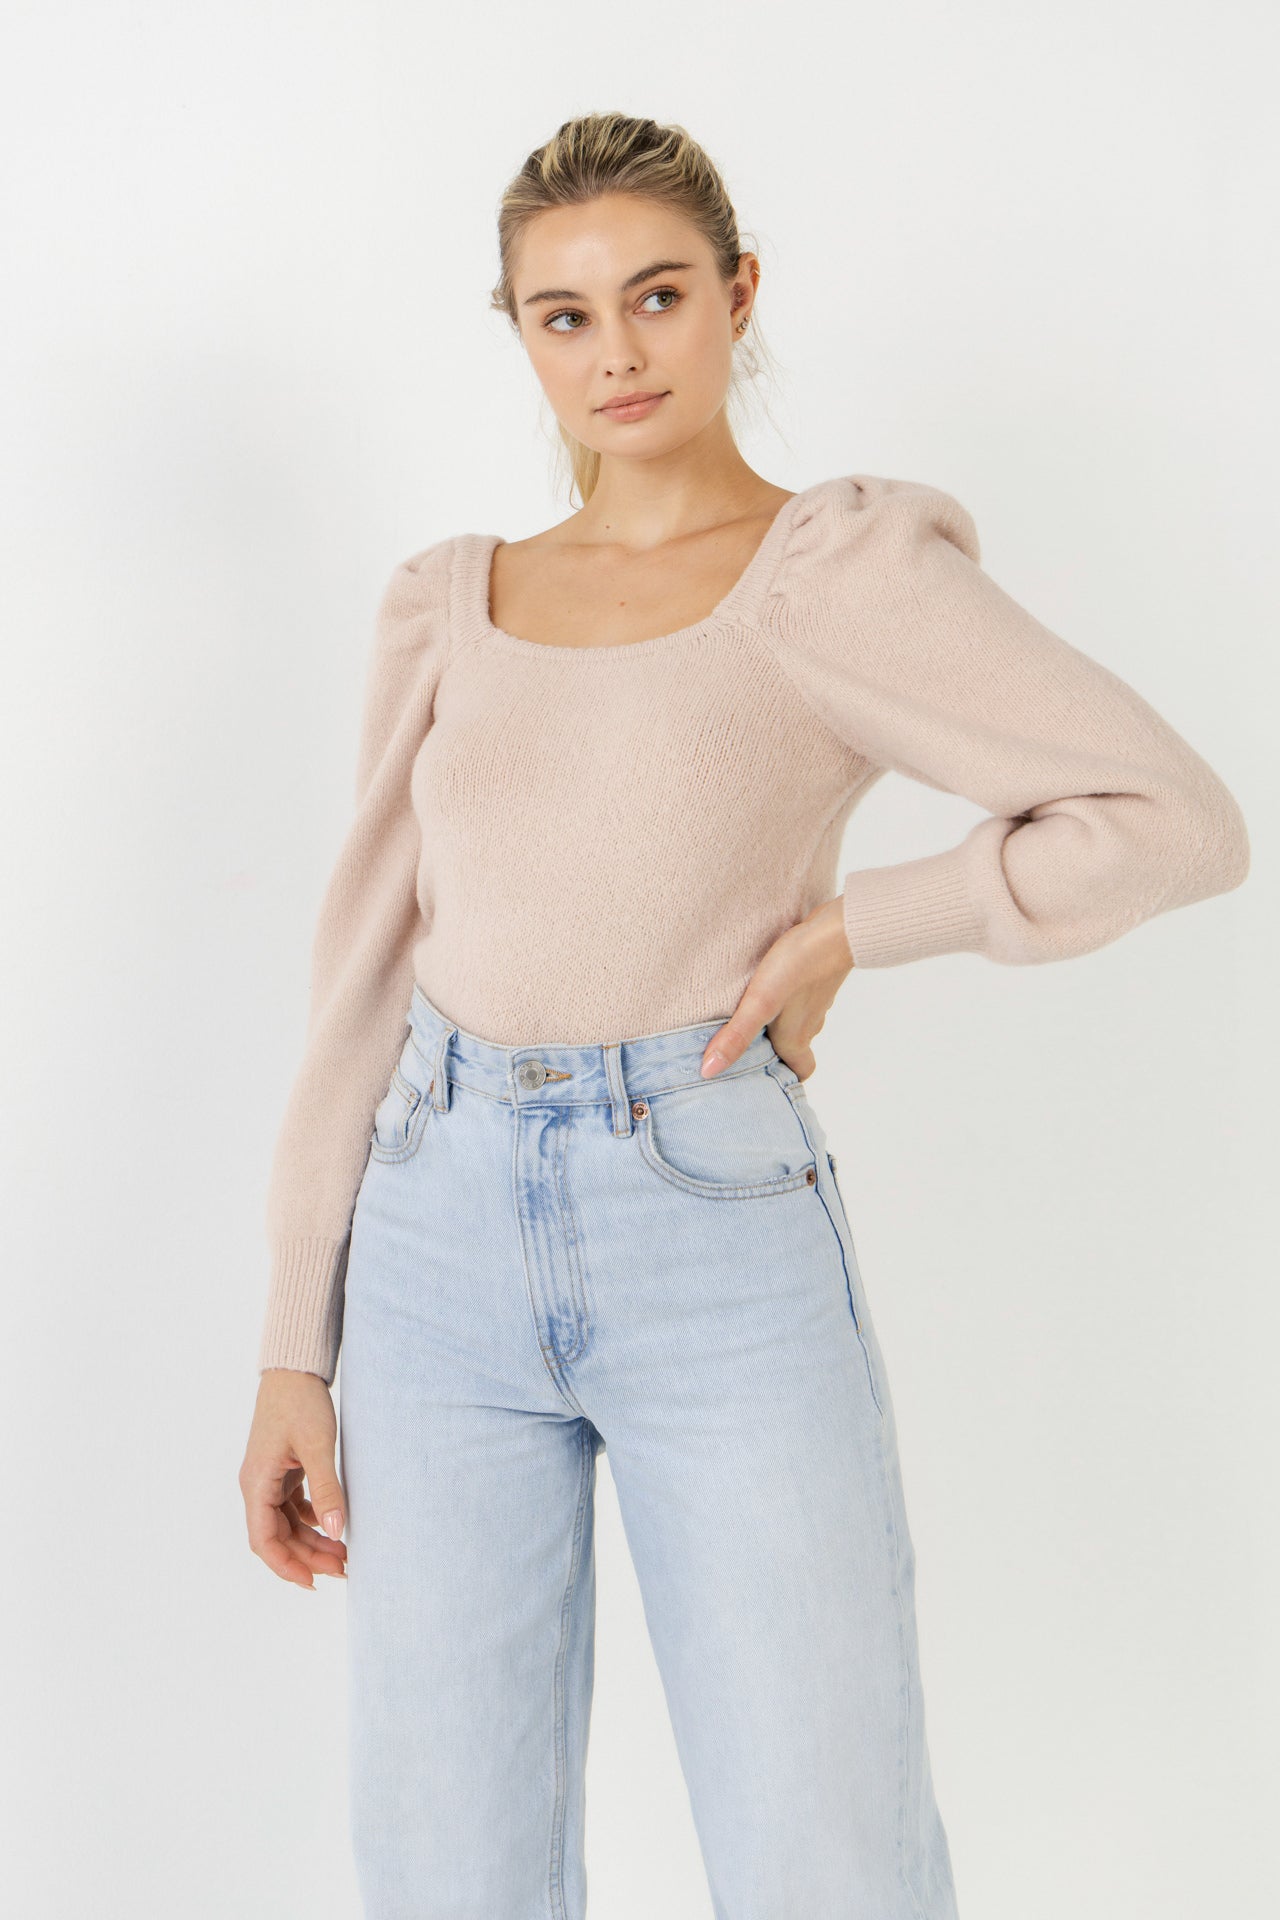 ENDLESS ROSE - Puff Sleeve Sweater - SWEATERS & KNITS available at Objectrare